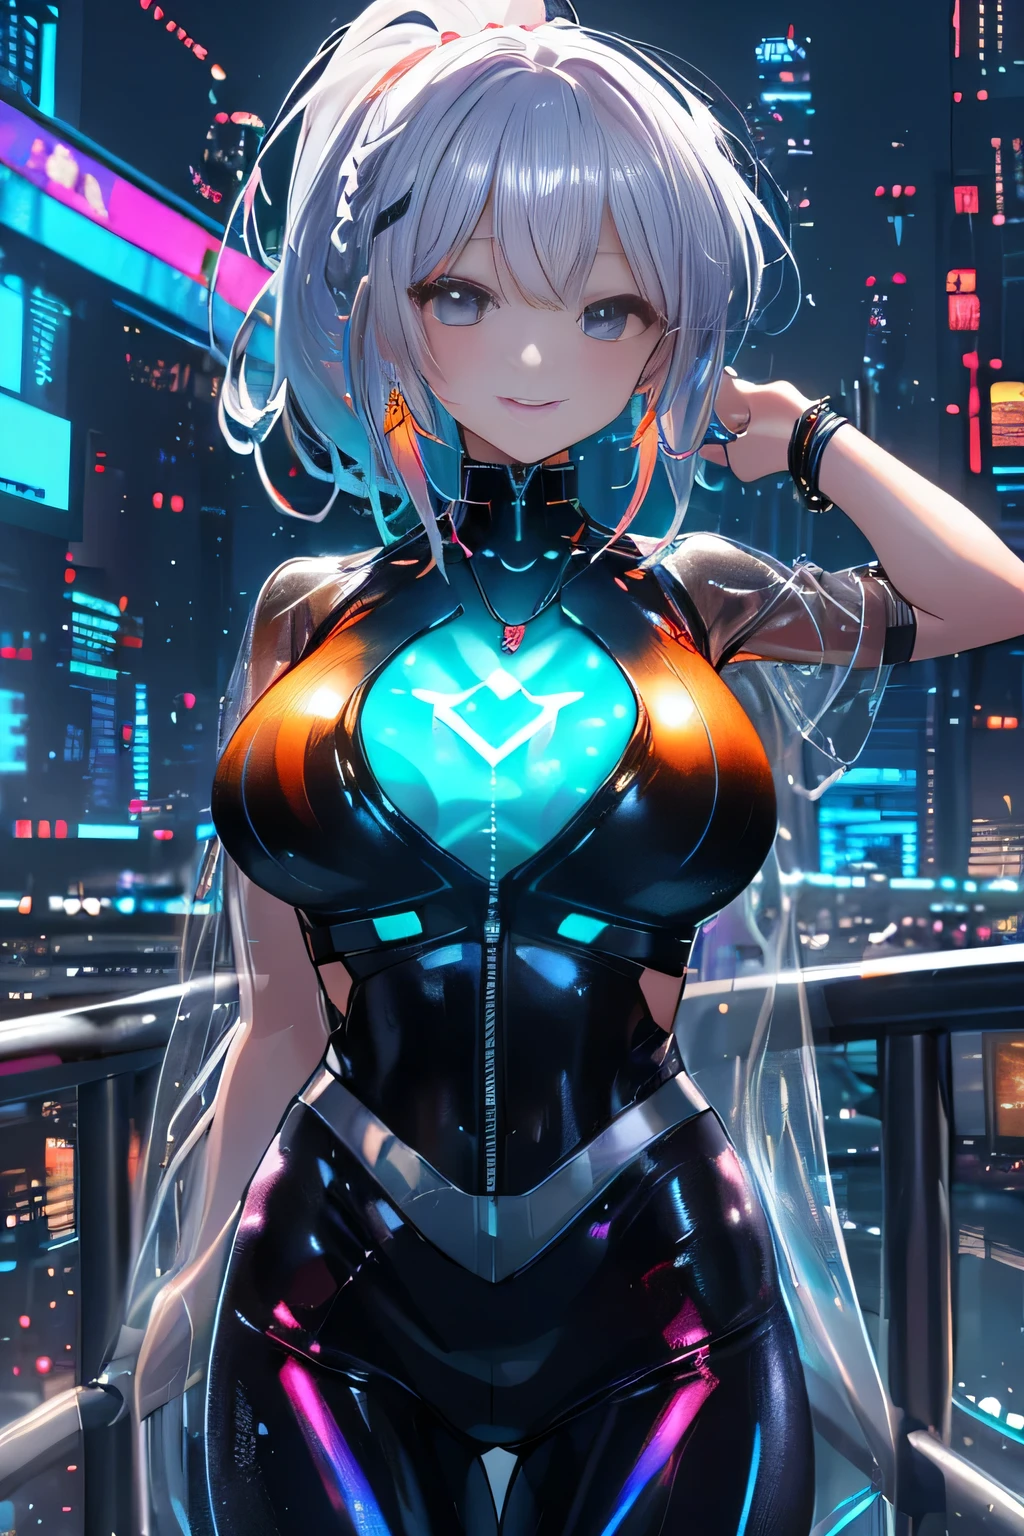 cyber city at night,(Gorgeous night view illumination:1.3).(Sexy super shiny orange transparent holographic mechanical cyberpunk suit:1.3) ,necklace,earrings, smile.sexy pose, (silver hair、Ponytail twisted buns decorated with elaborate braids and beads,Braided setup fishbone hair,colorful hair tips),(The bangs are see-through bangs),(hairpin、ponytail、floating hair、),Breast flick,(emphasize big breasts:1.3),professional lighting,cinematic light,(table top,highest quality,Ultra high resolution output image,) ,(8K quality,),(sea art 2 mode:1.3),,(Image mode Ultra HD,)